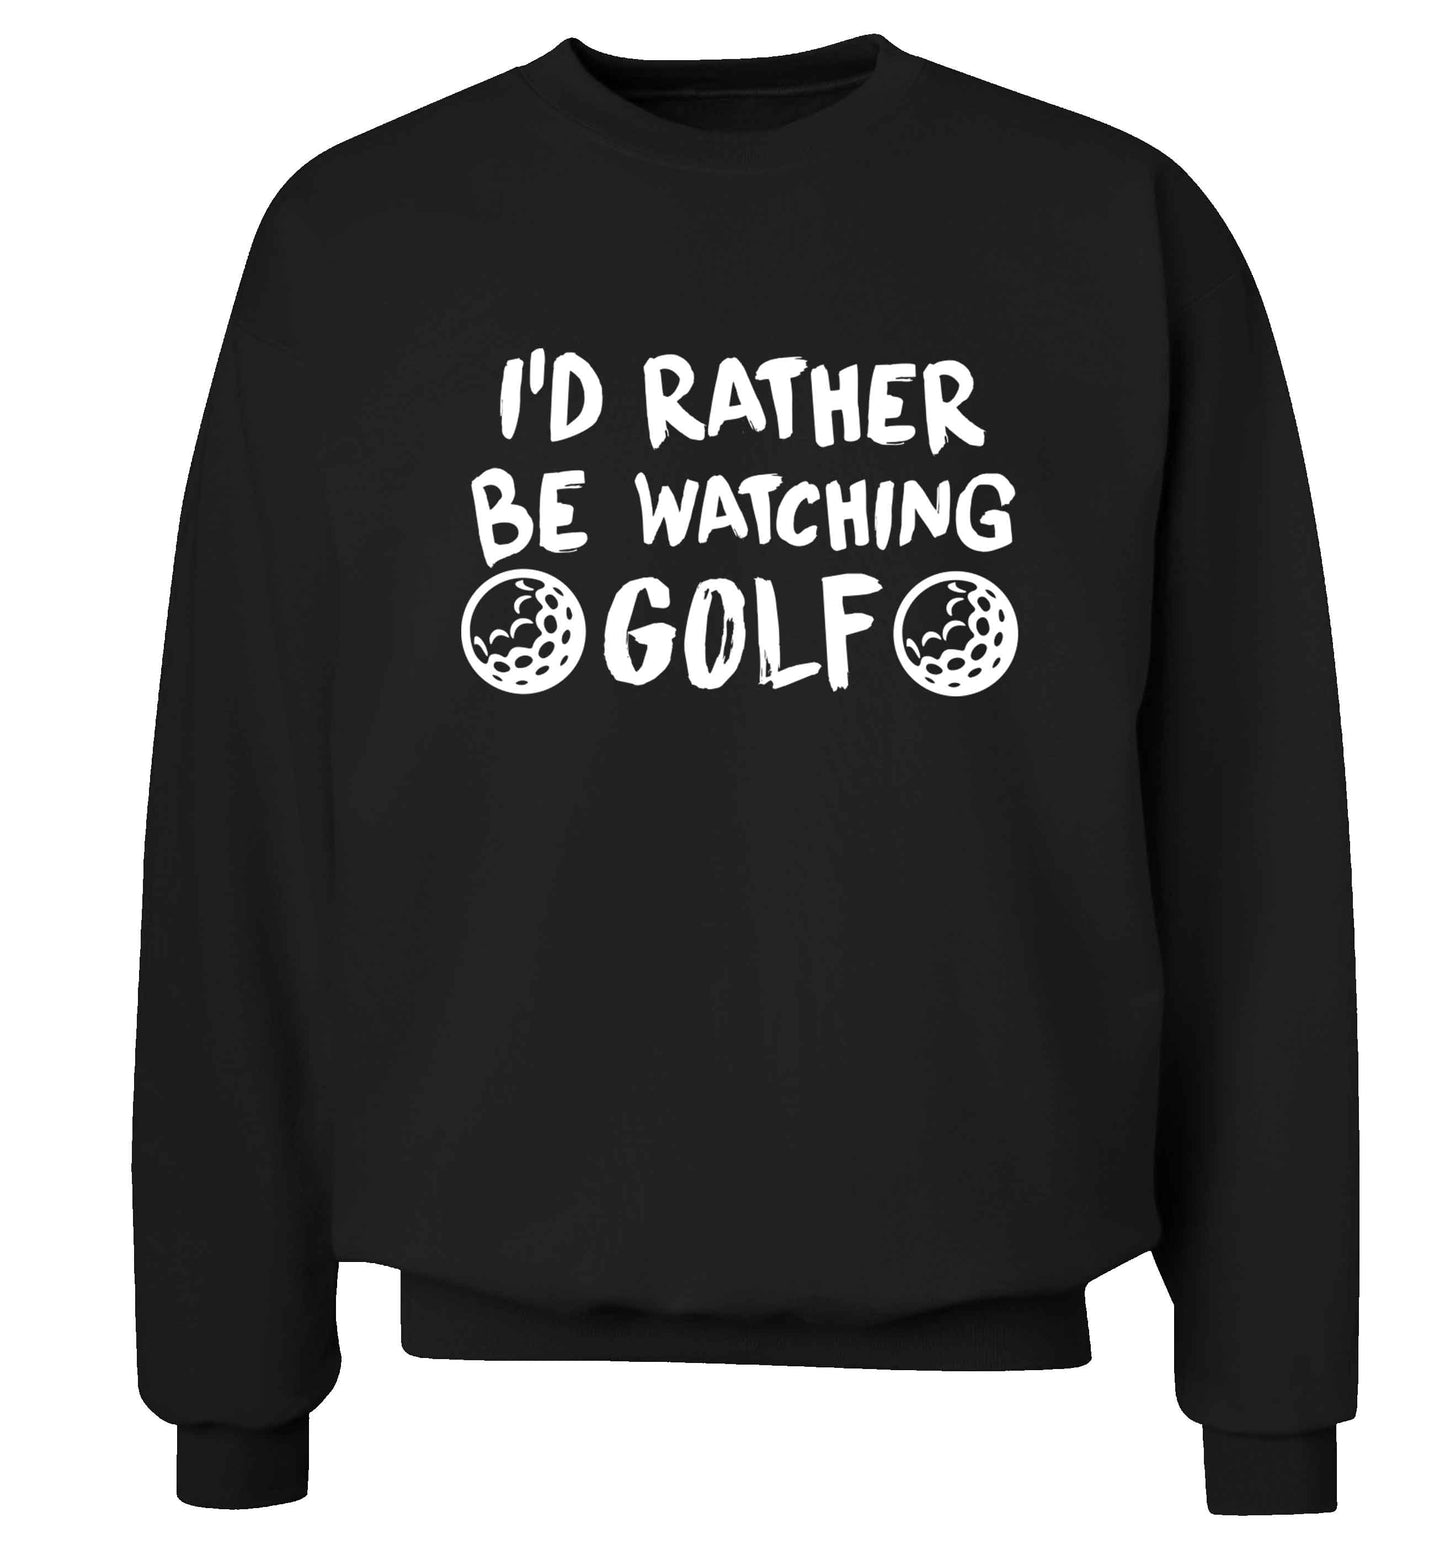 I'd rather be watching golf Adult's unisex black Sweater 2XL